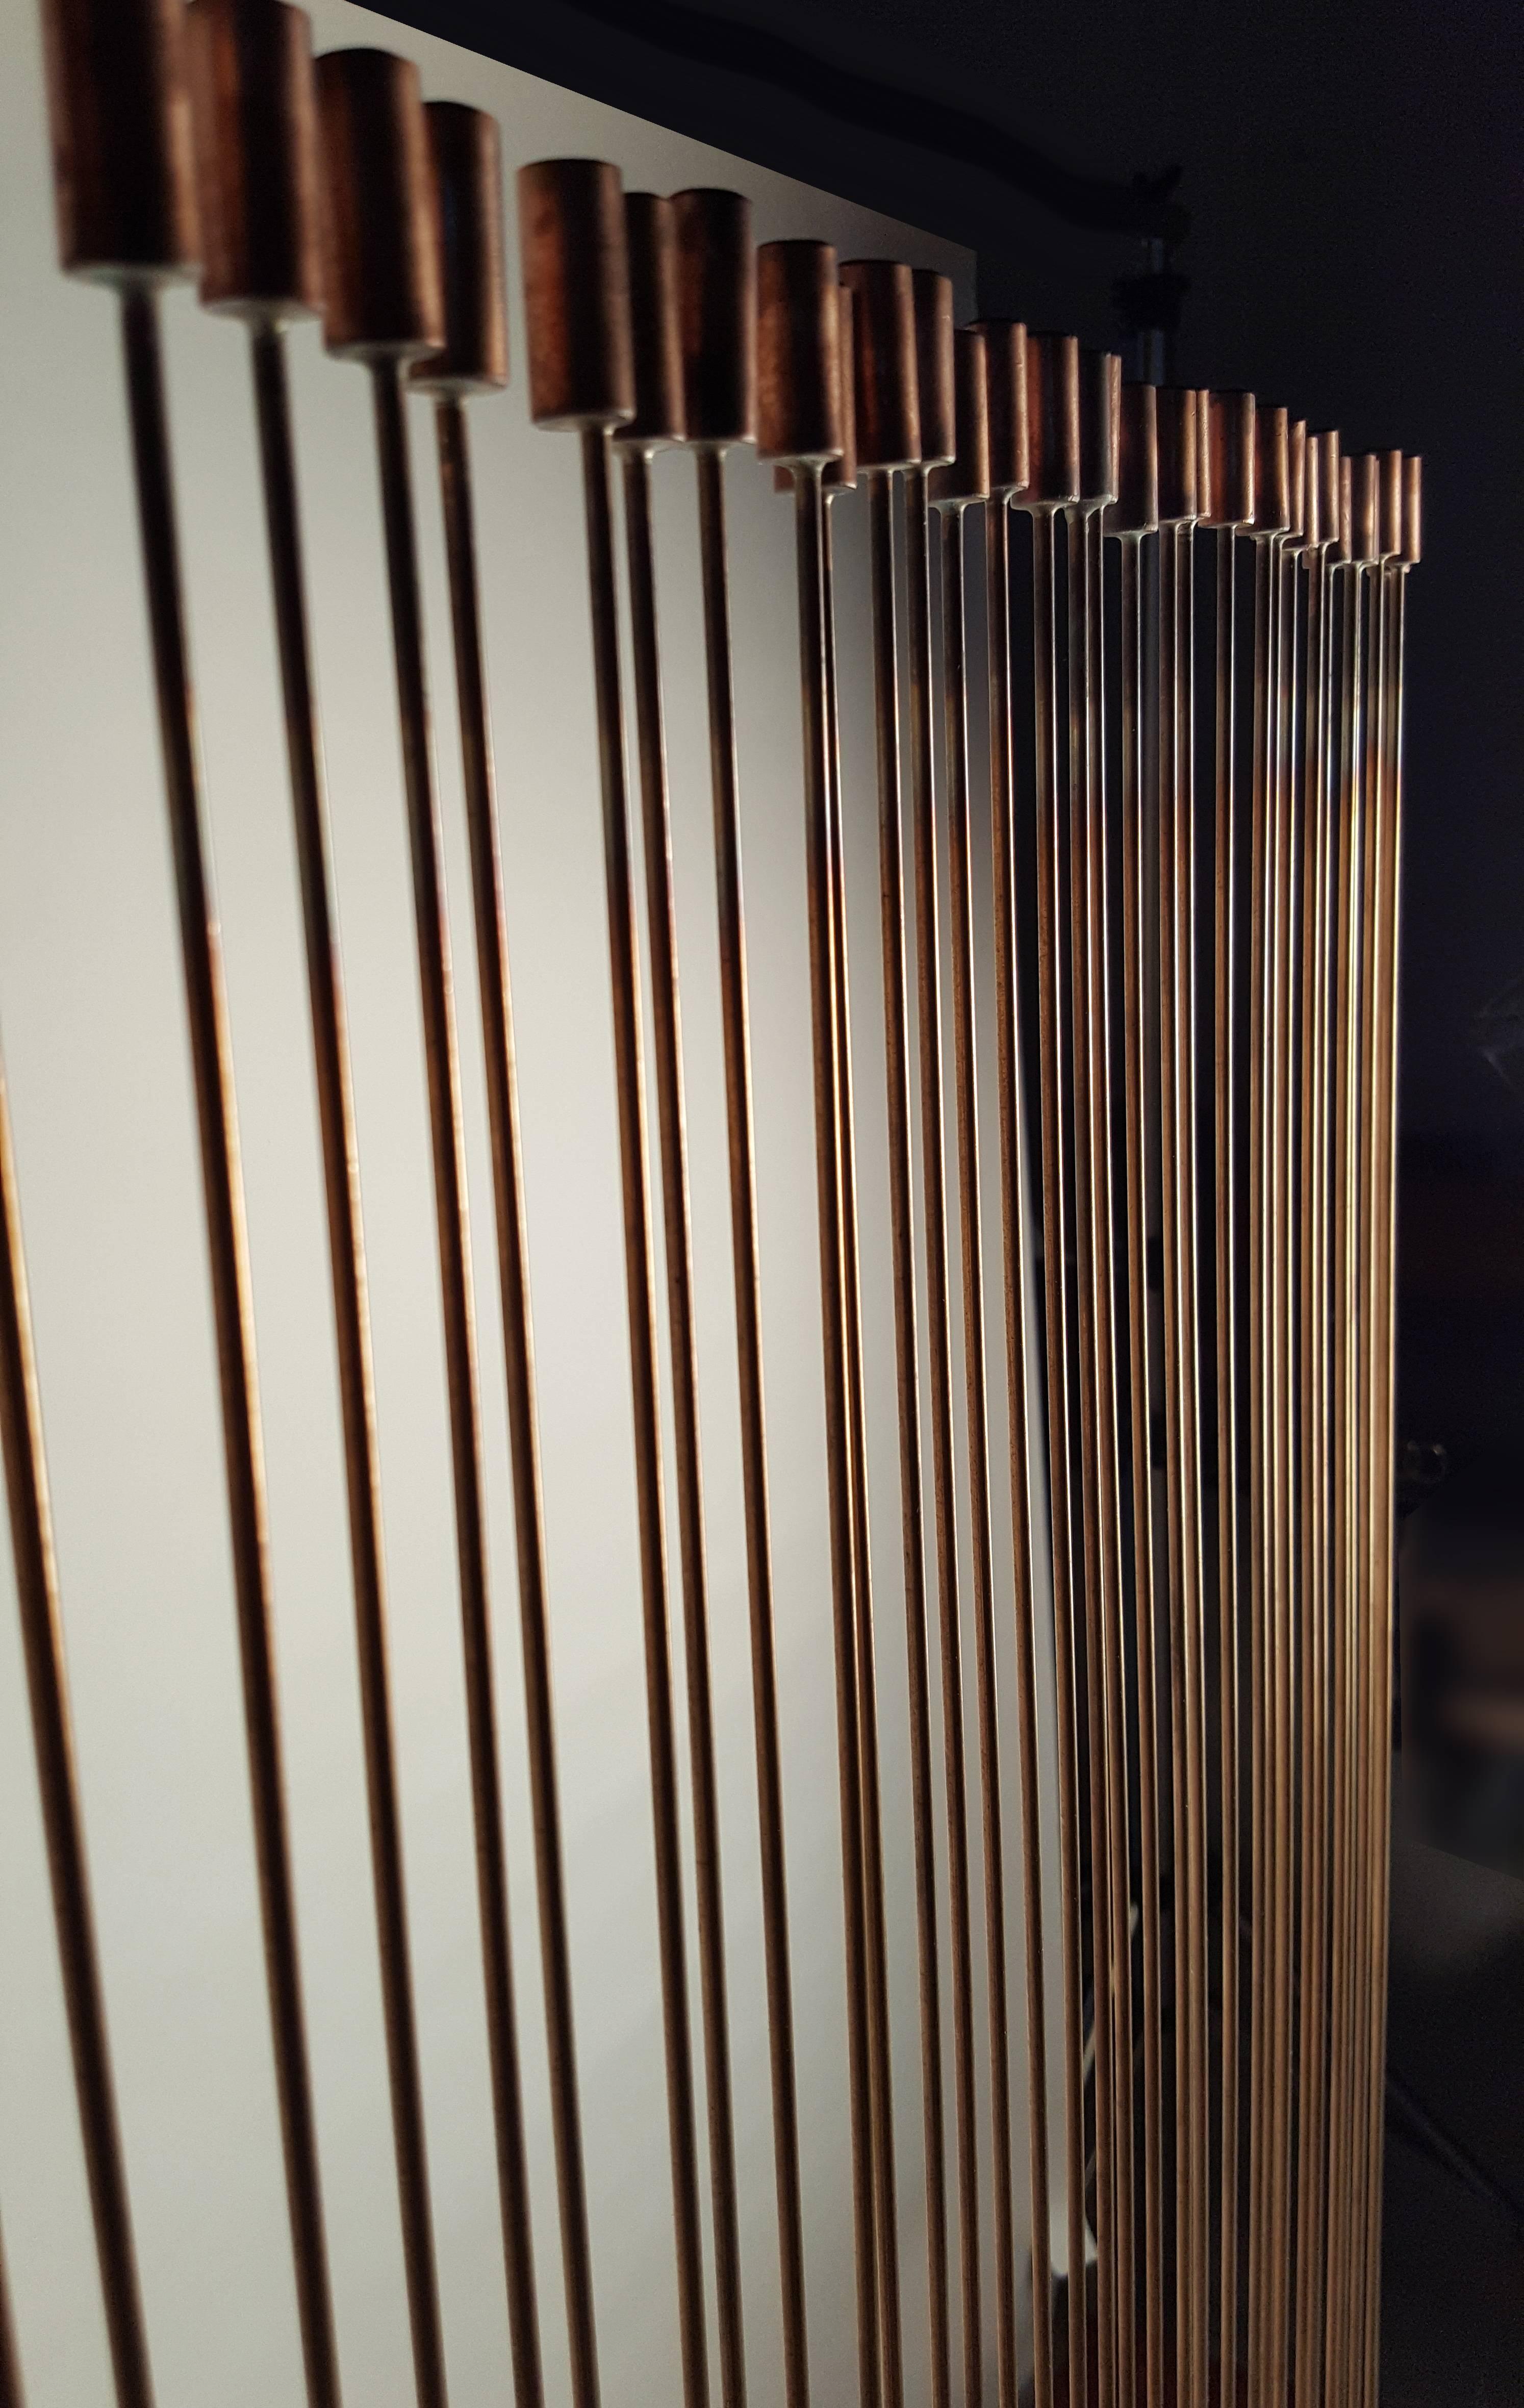 American Large Val Bertoia 'Sonambient' Bronze and Copper Sound Sculpture